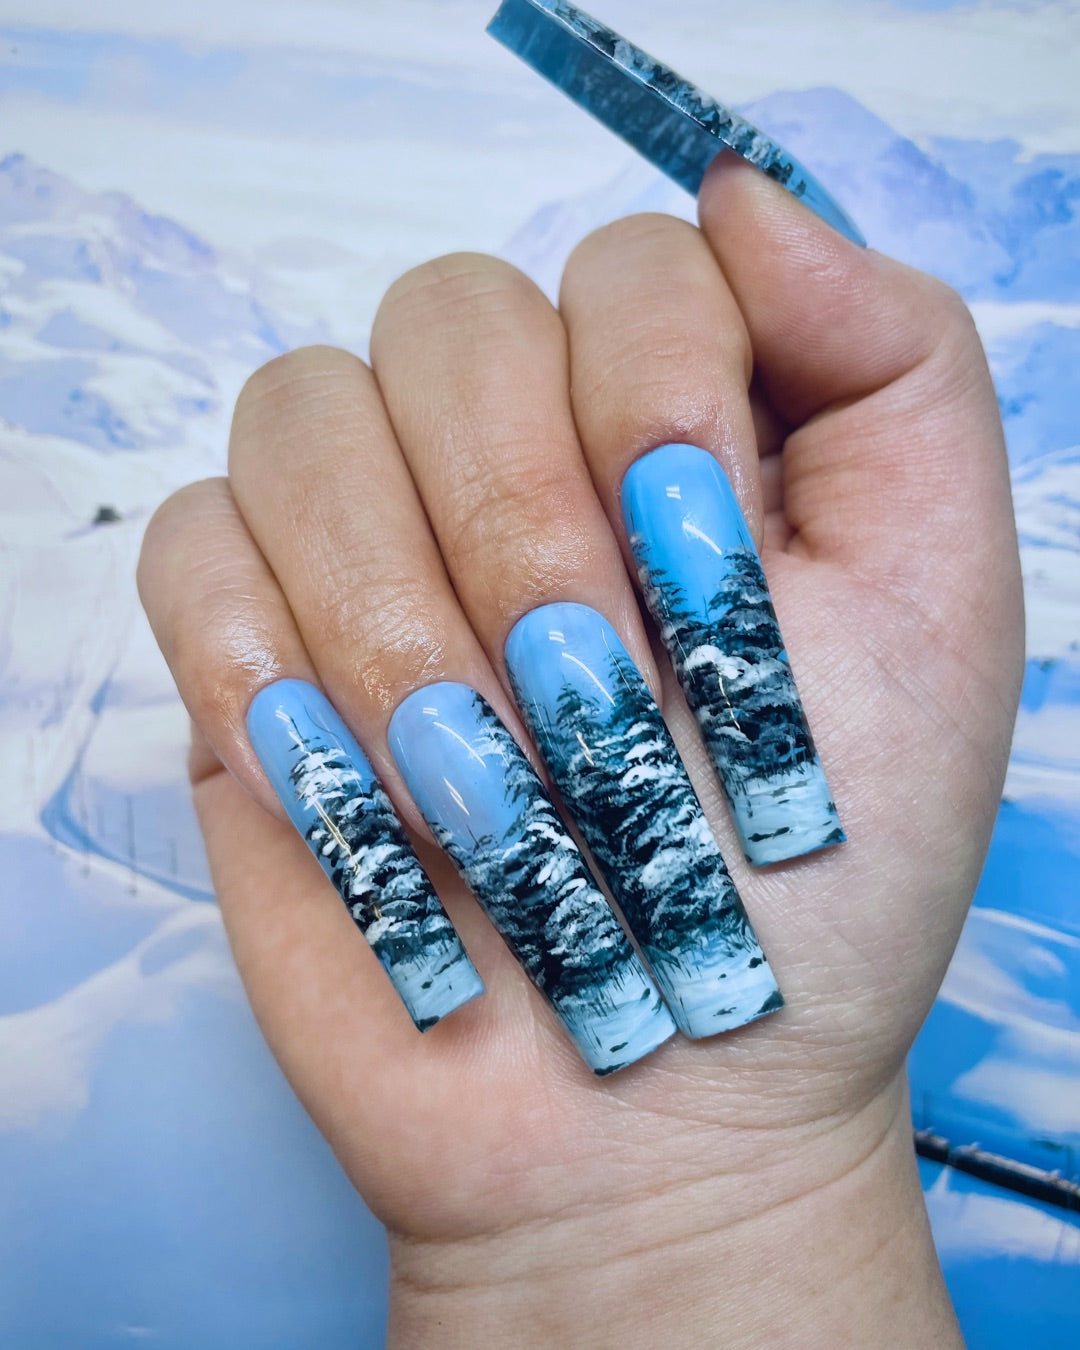 45 Best Fall Nail Ideas 2021 : Blue marble coffin nails